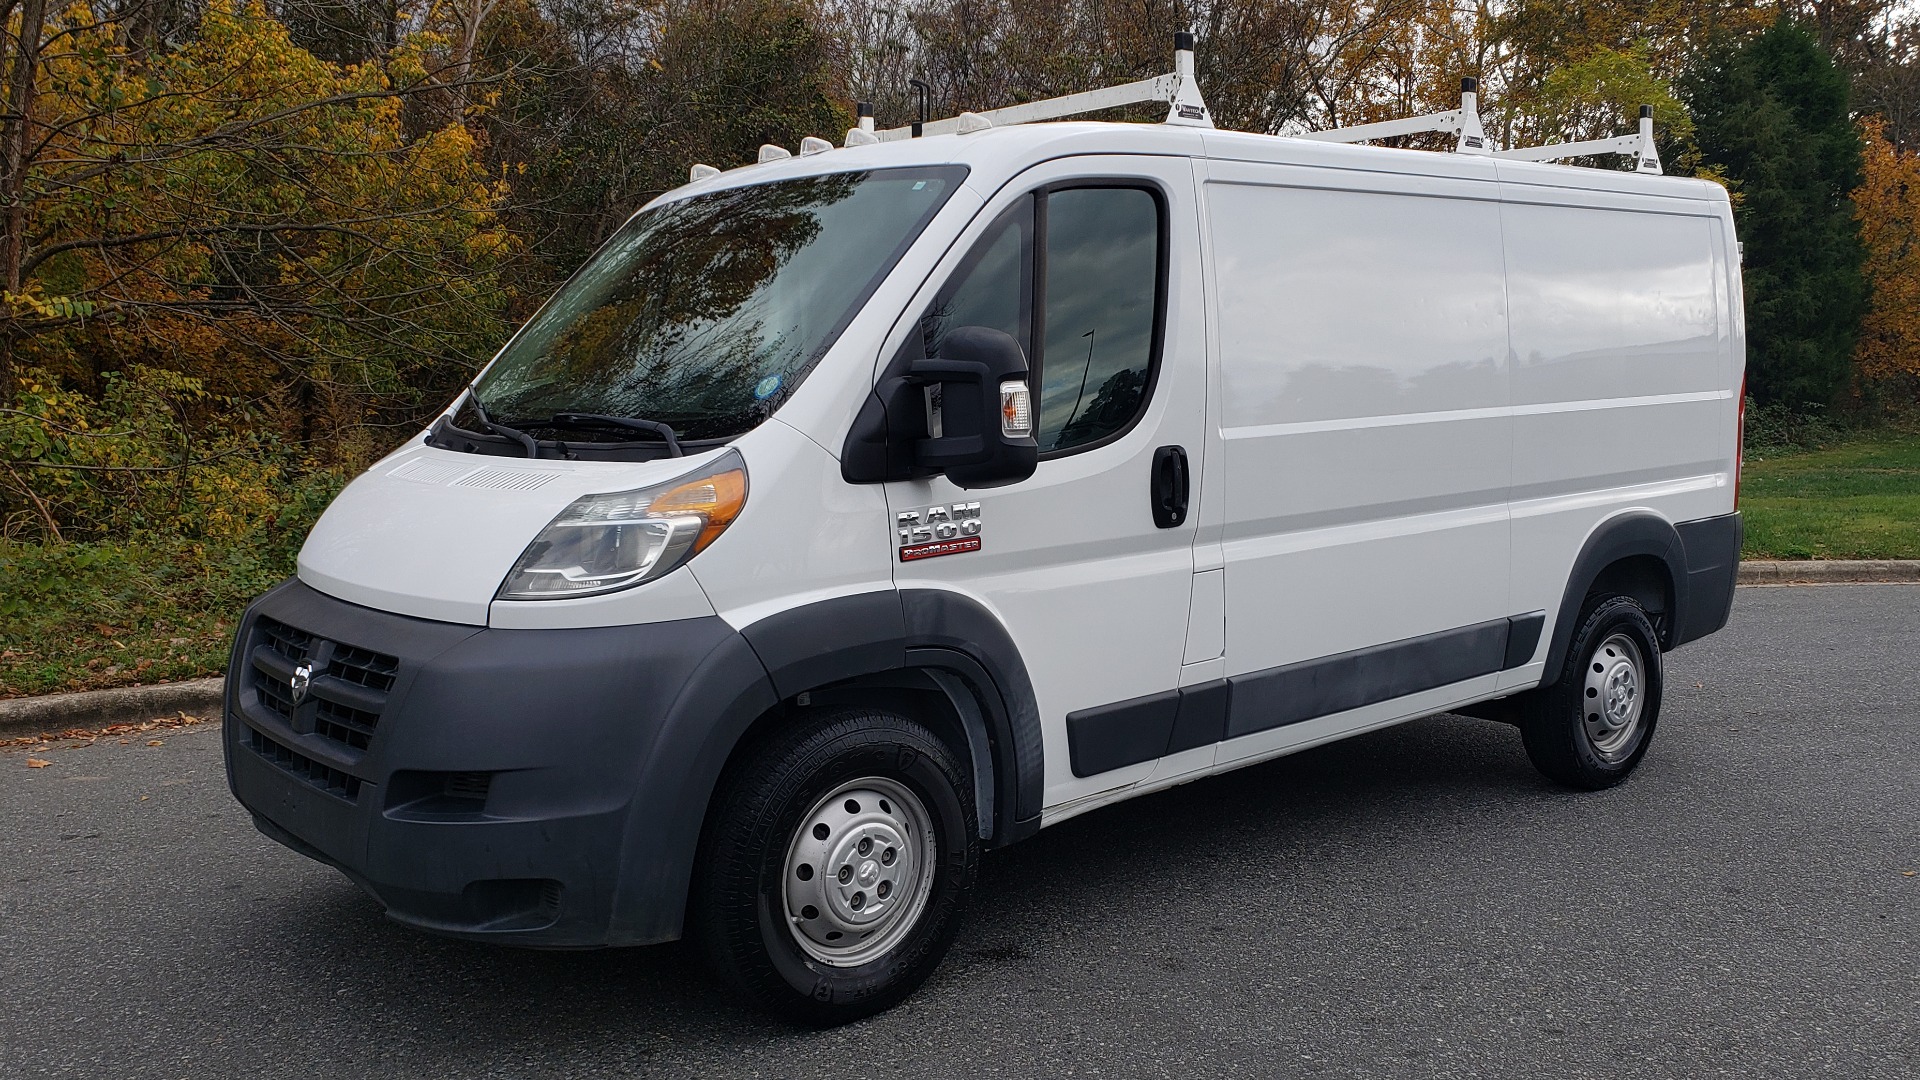 Used 2015 Ram PROMASTER CARGO VAN 136-INCH WB / LOW ROOF / LADDER RACK / INSIDE RACKS for sale Sold at Formula Imports in Charlotte NC 28227 1